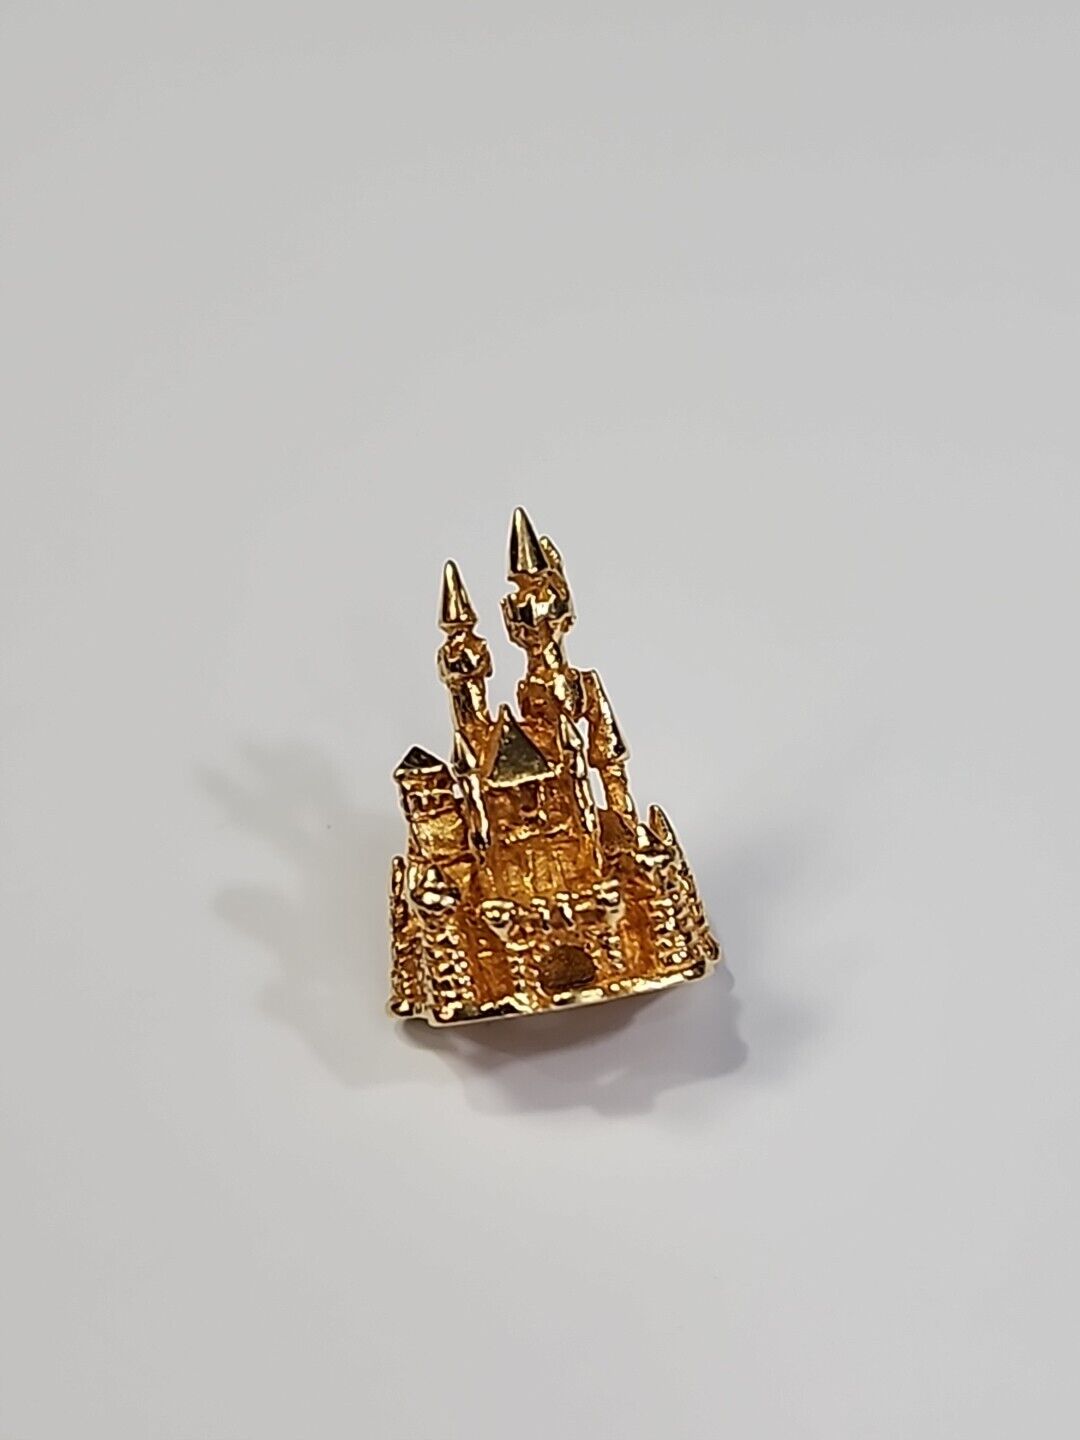 Disneyland Sleeping Beauty Castle Tie Tack Pin 14K Gold W.D.P. Extremely RARE